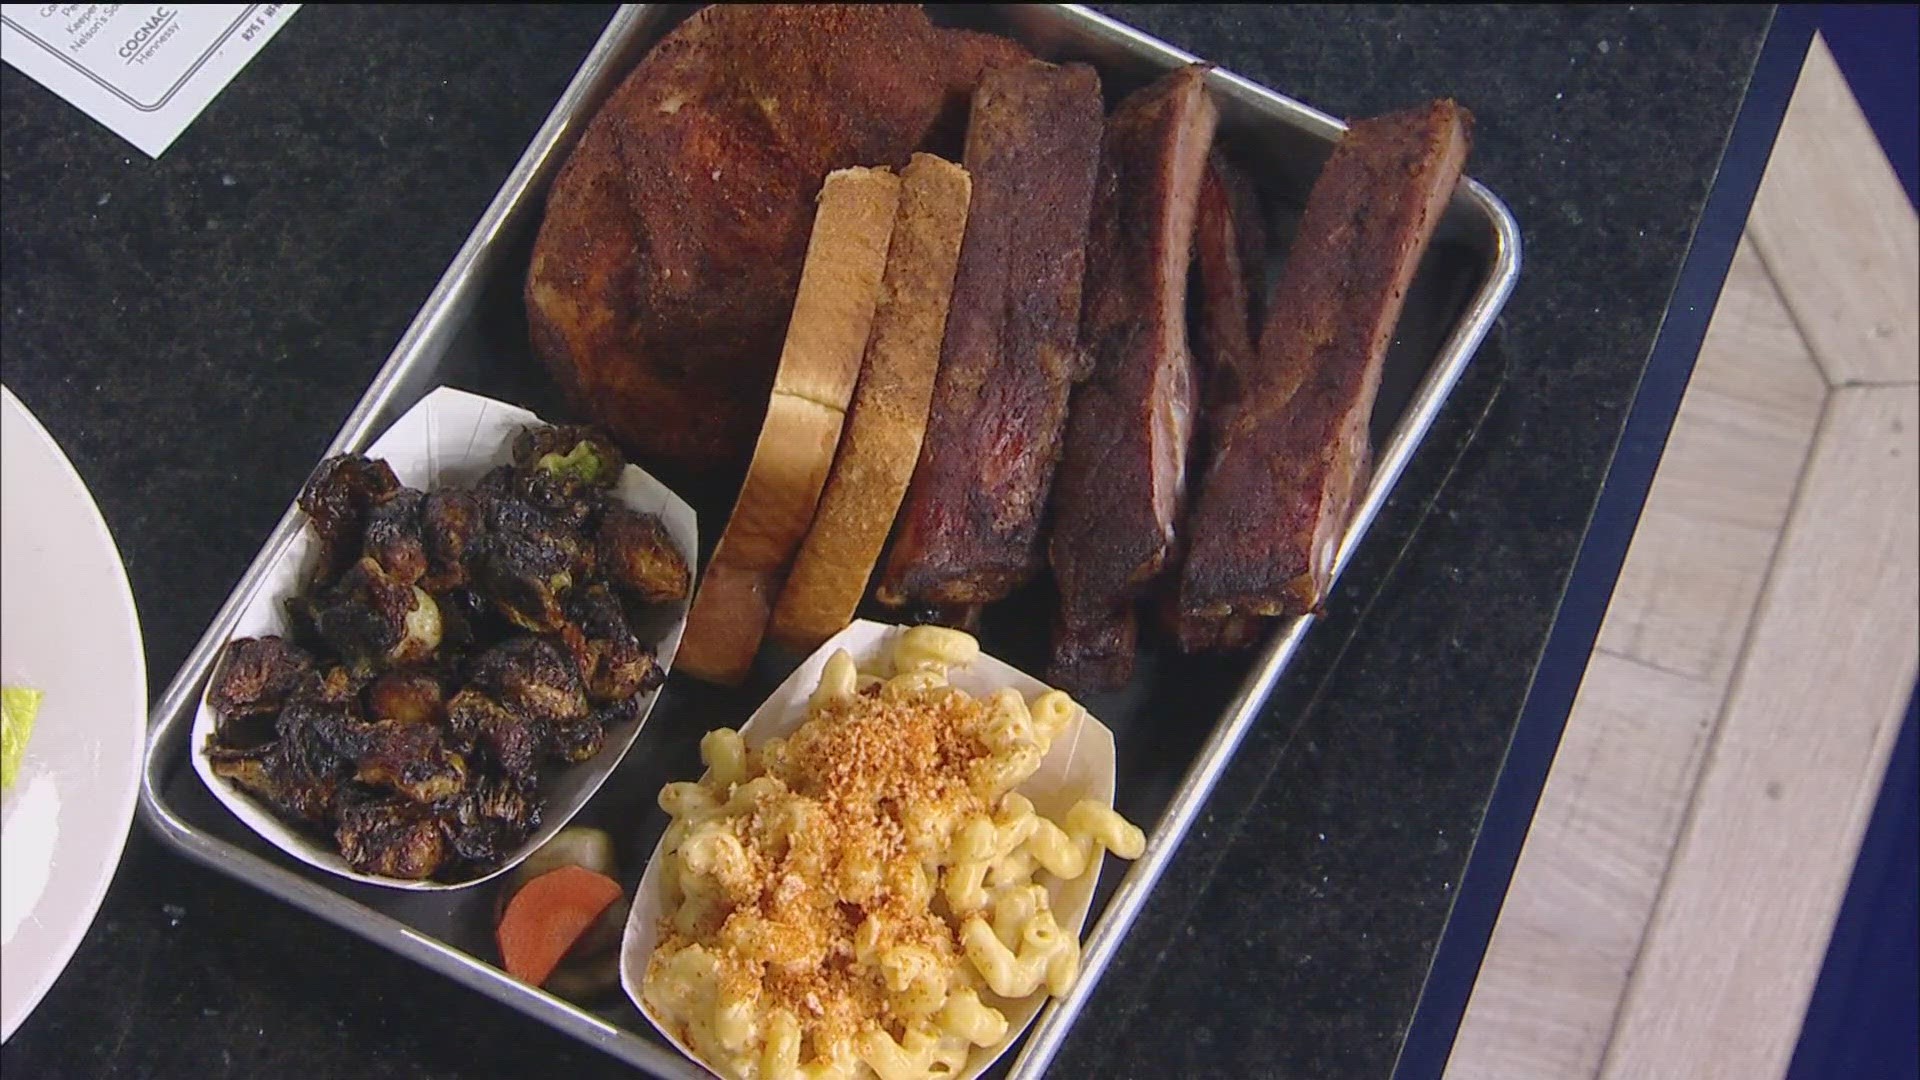 Co-owner and executive chef of Beast Barbeque Jeff Weber joined KARE 11 News at Noon to encourage diners to visit the restaurant in support of Dining Out For Life.